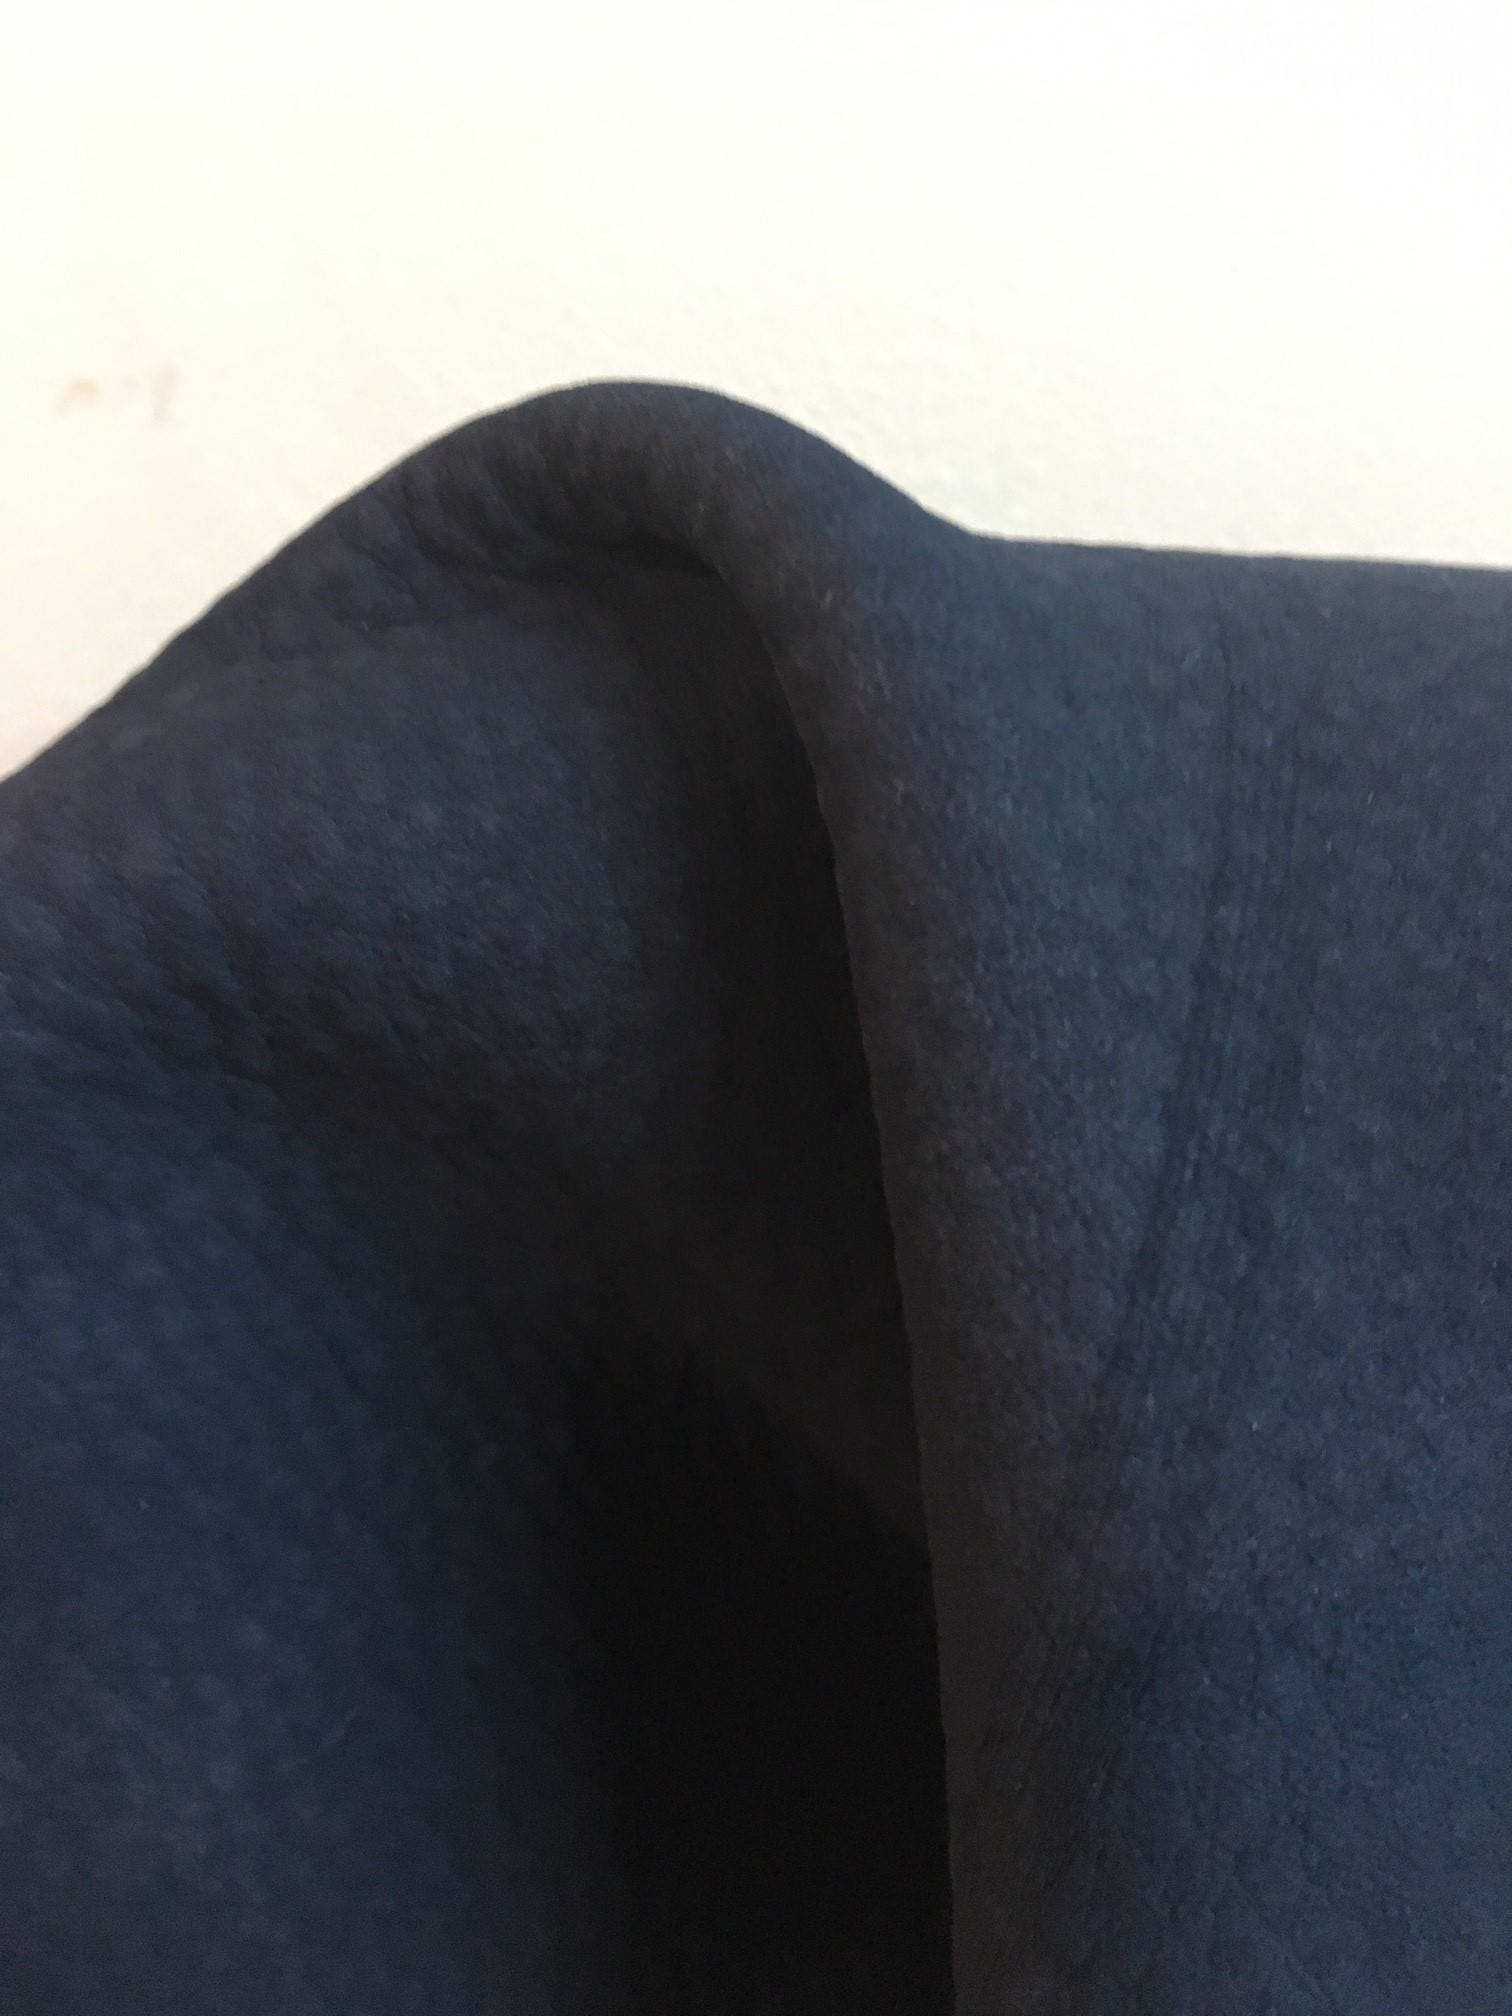 Leather 16 sq.ft full skin Navy Nubuck Smooth Nappa Slippery Cowhide ...